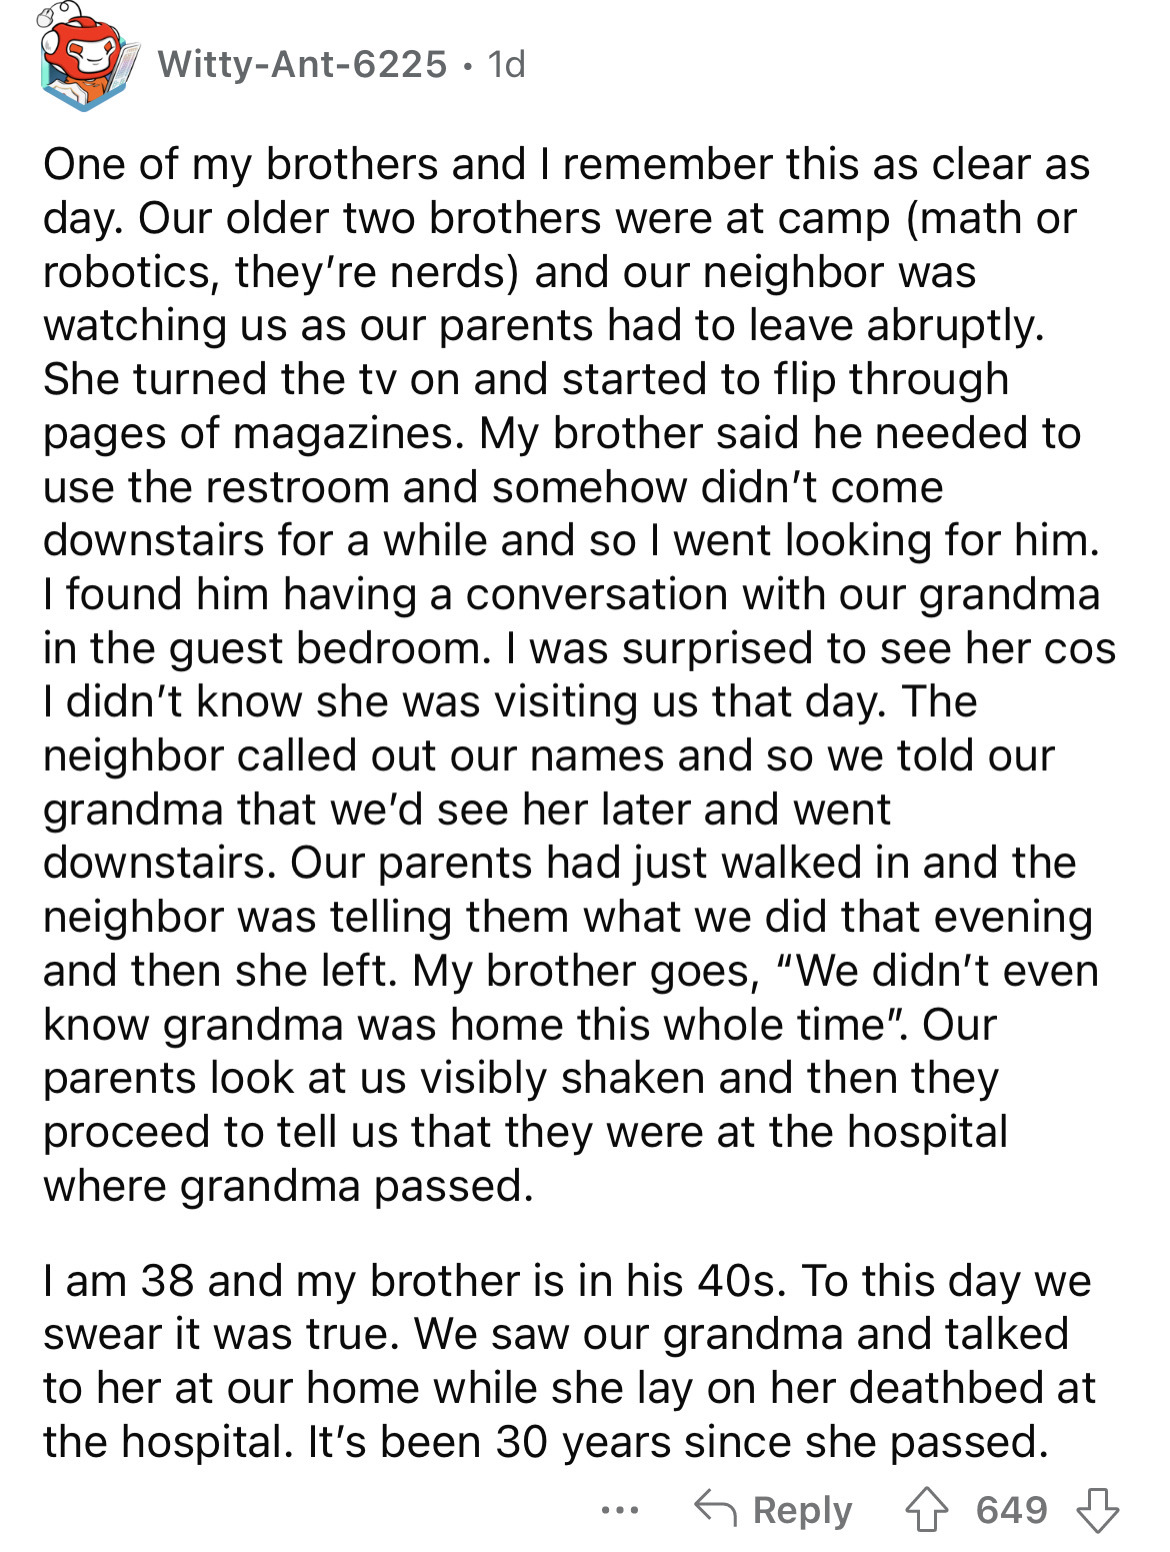 document - WittyAnt6225. 1d One of my brothers and I remember this as clear as day. Our older two brothers were at camp math or robotics, they're nerds and our neighbor was watching us as our parents had to leave abruptly. She turned the tv on and started